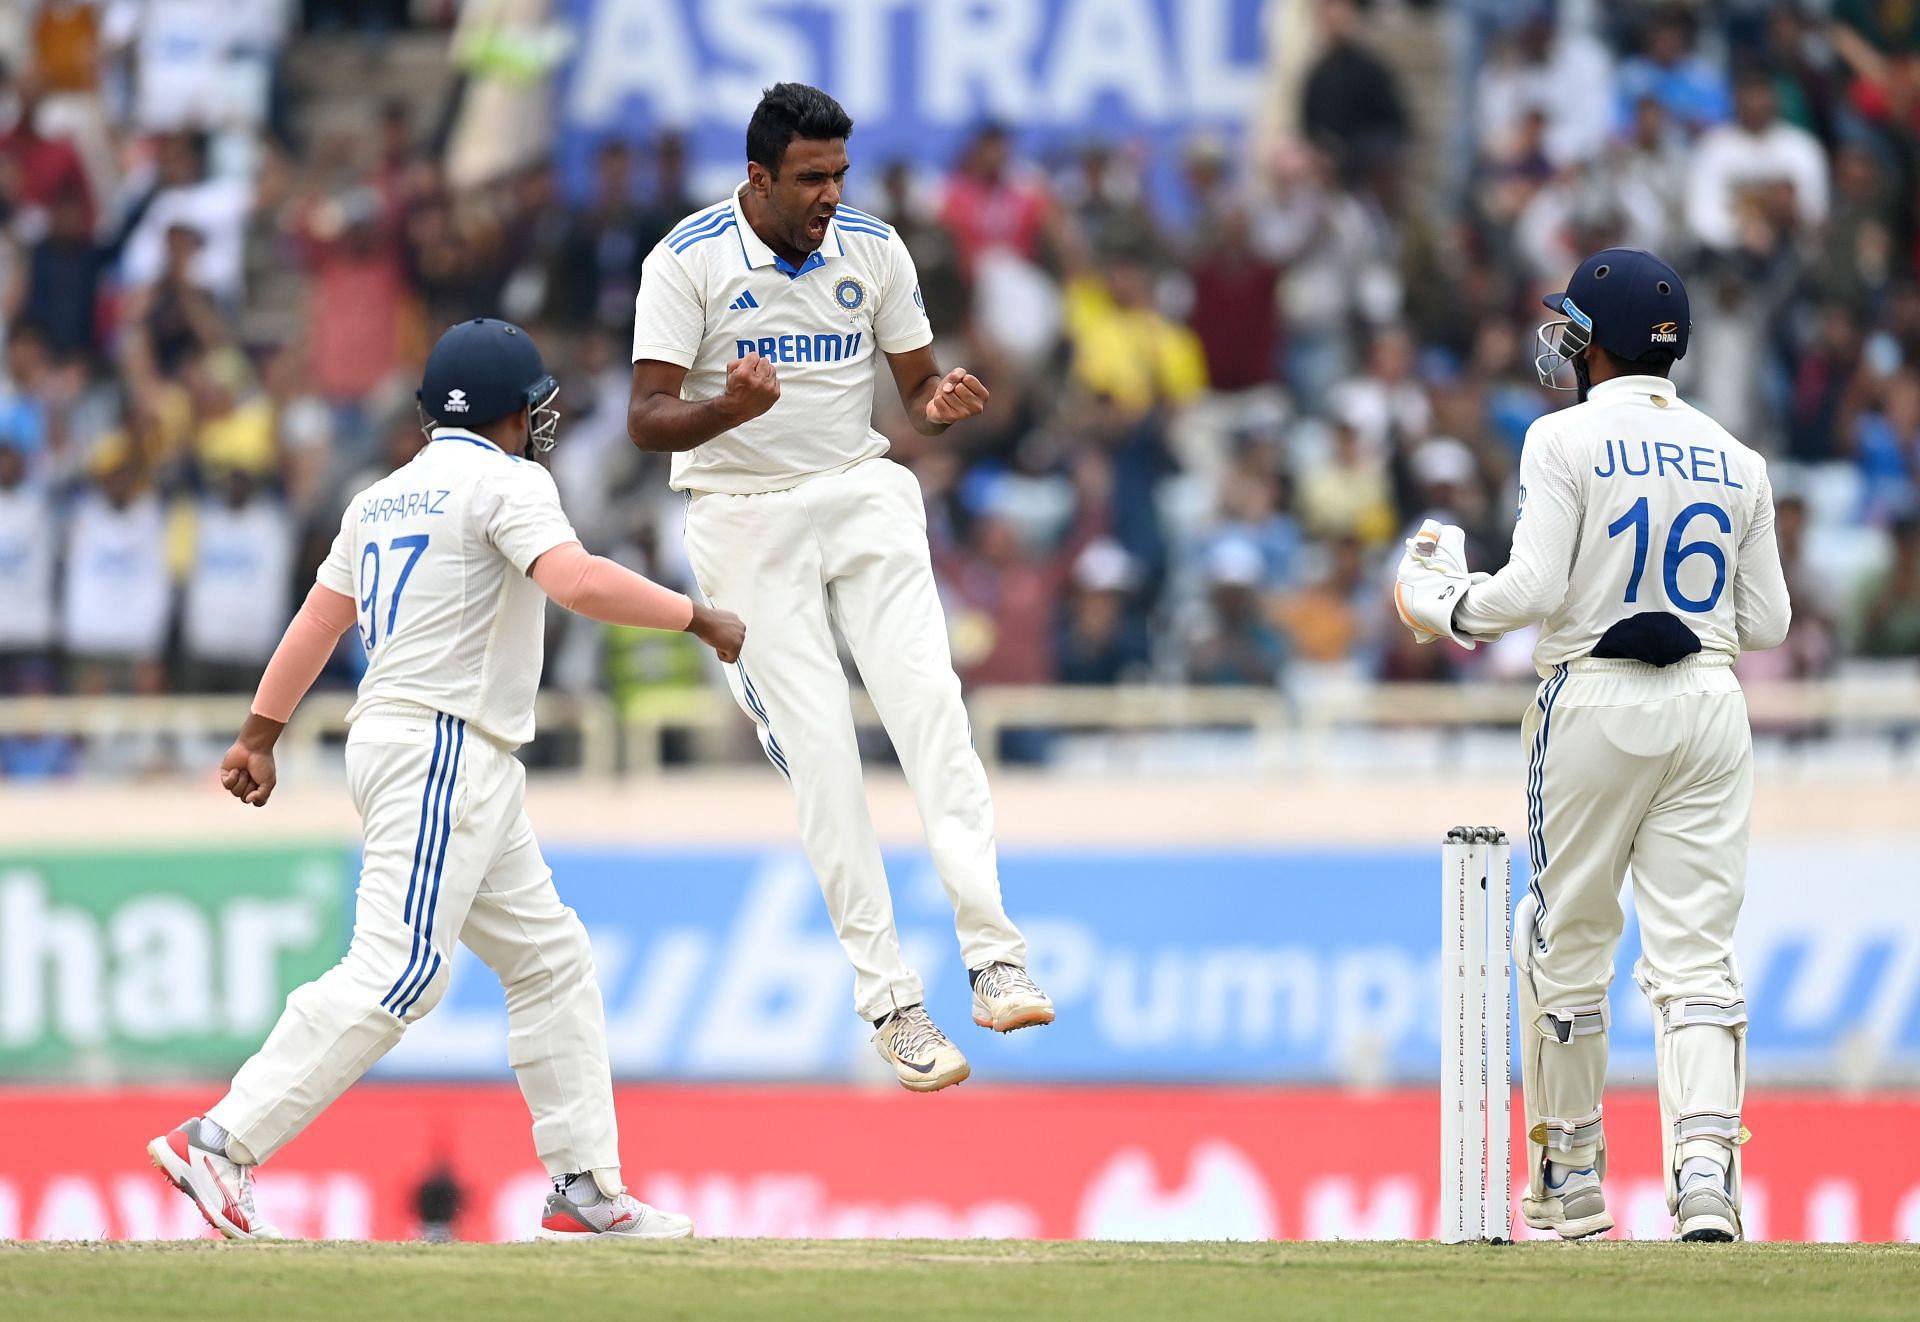 Ravichandran Ashwin helped India beat England in a WTC series this year (Image: Getty)